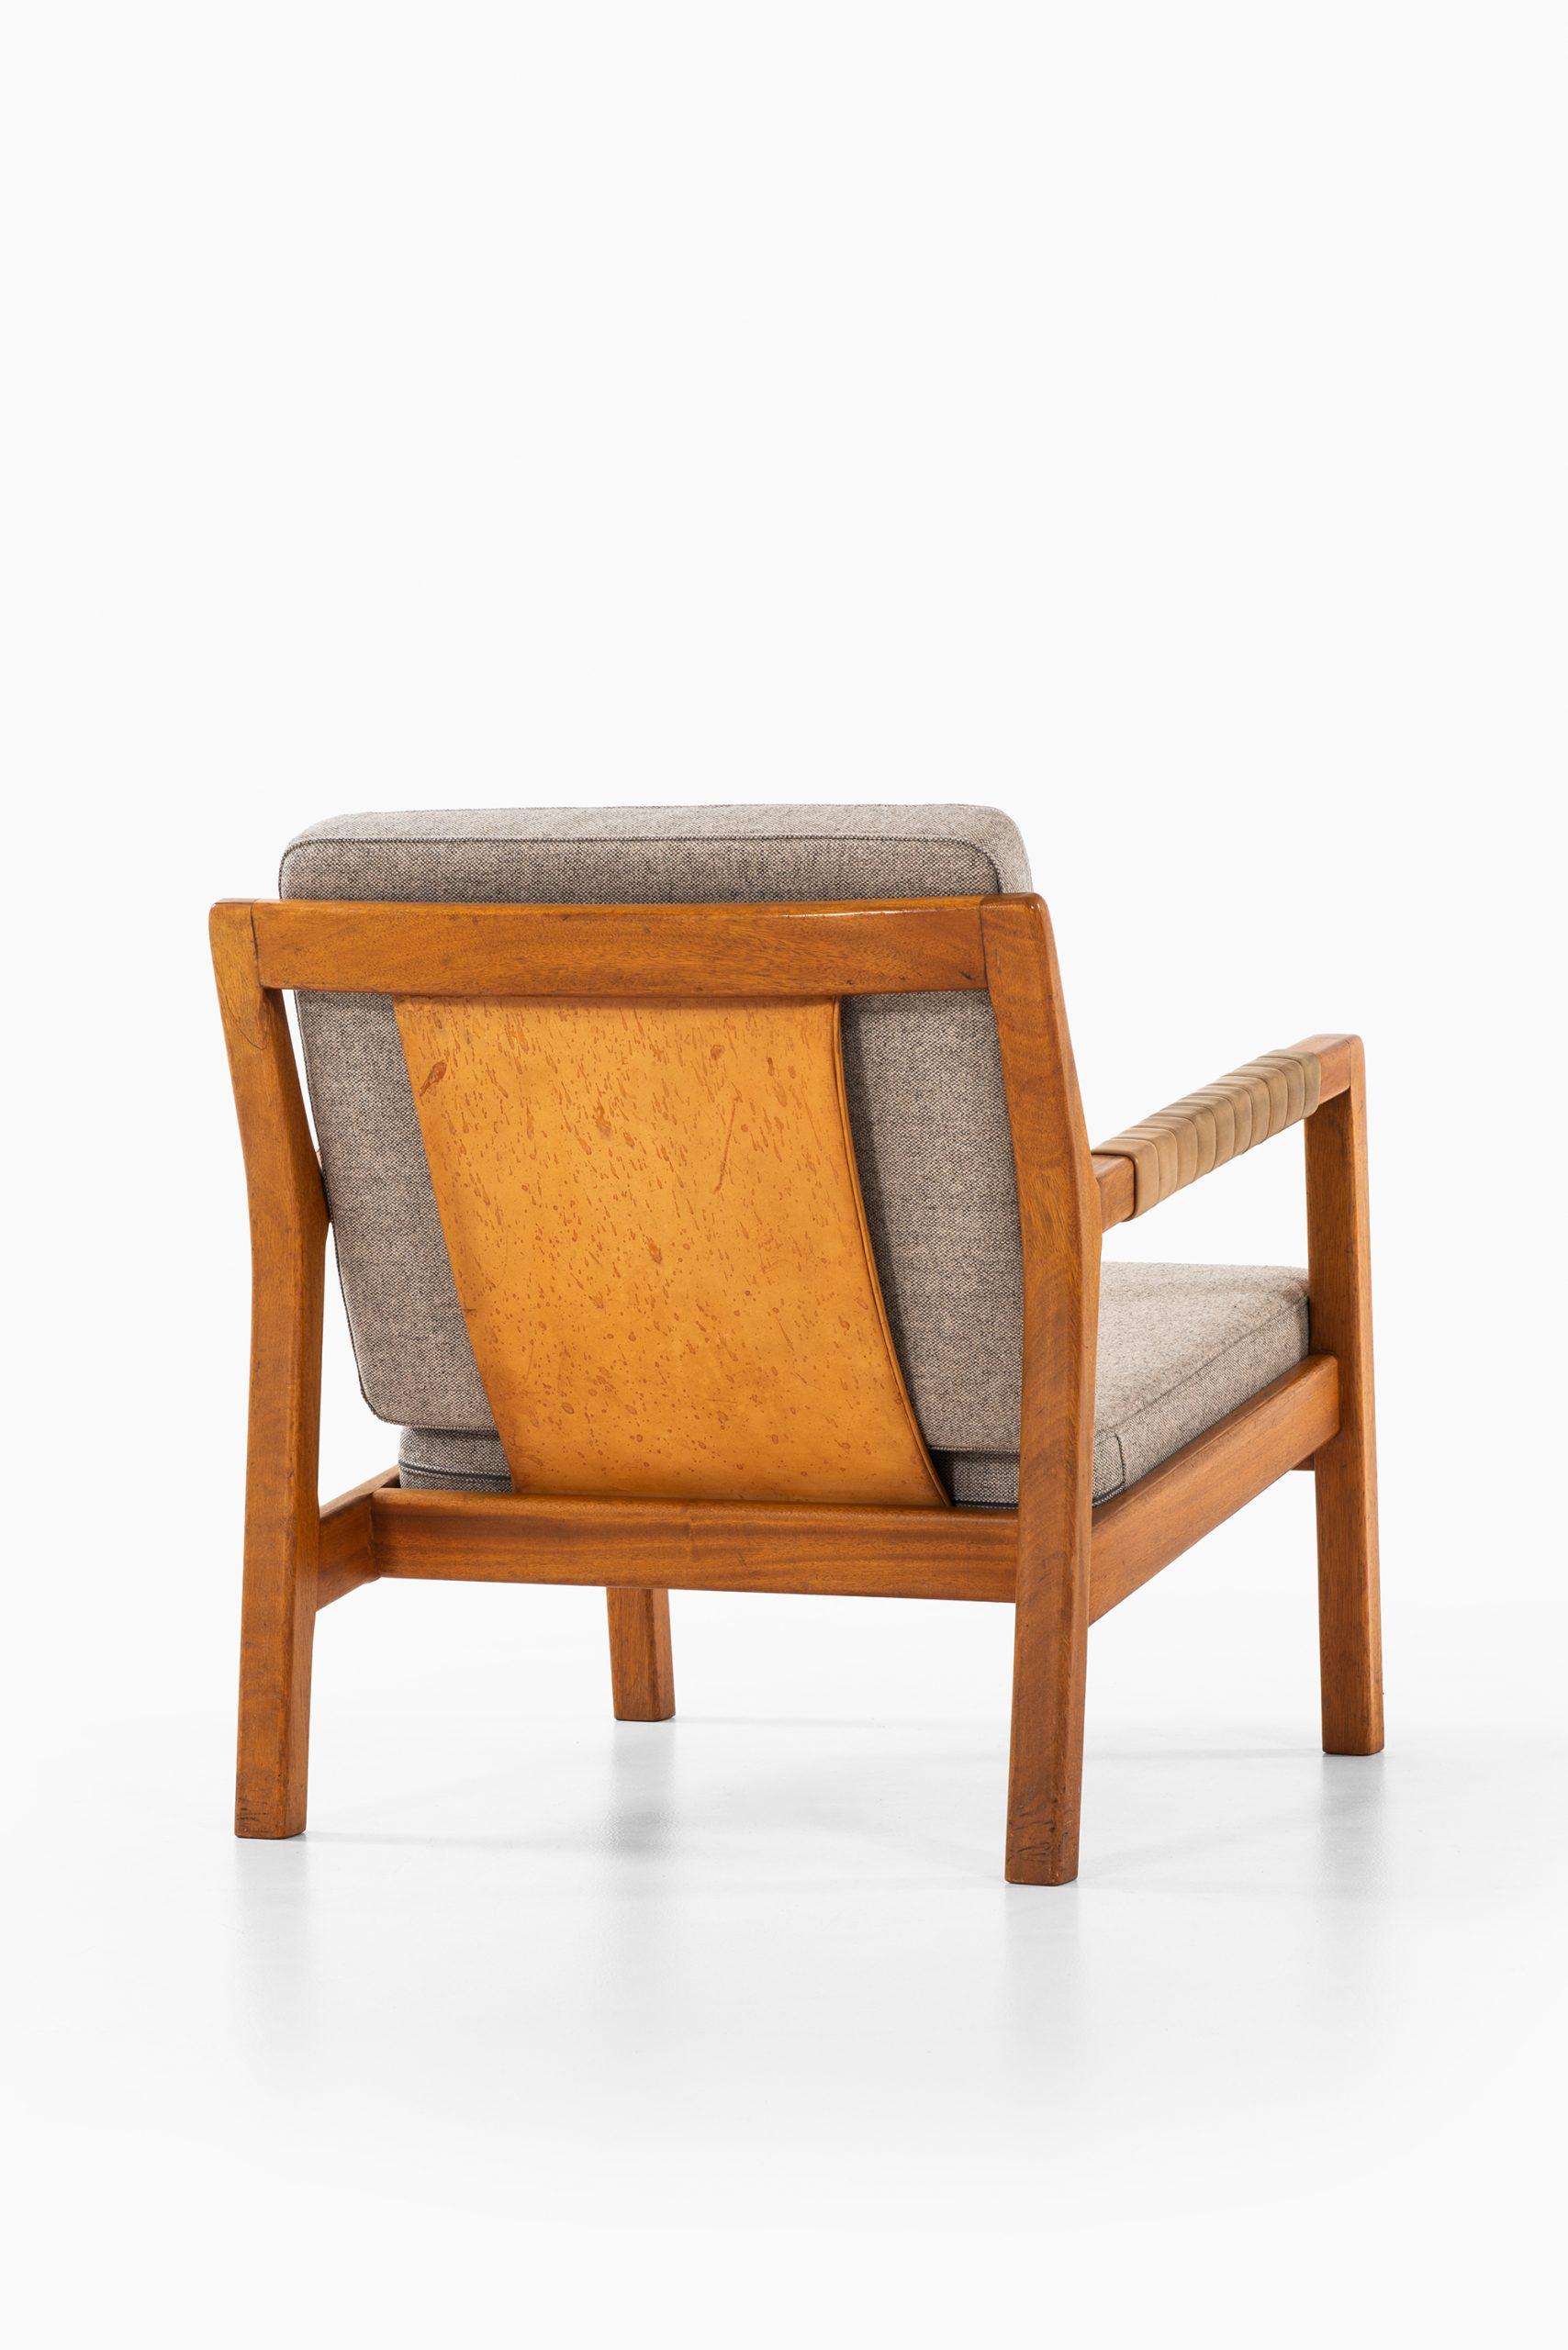 Mid-20th Century Carl Gustaf Hiort af Ornäs Easy Chairs Model Rialto by Puunveisto in Finland For Sale